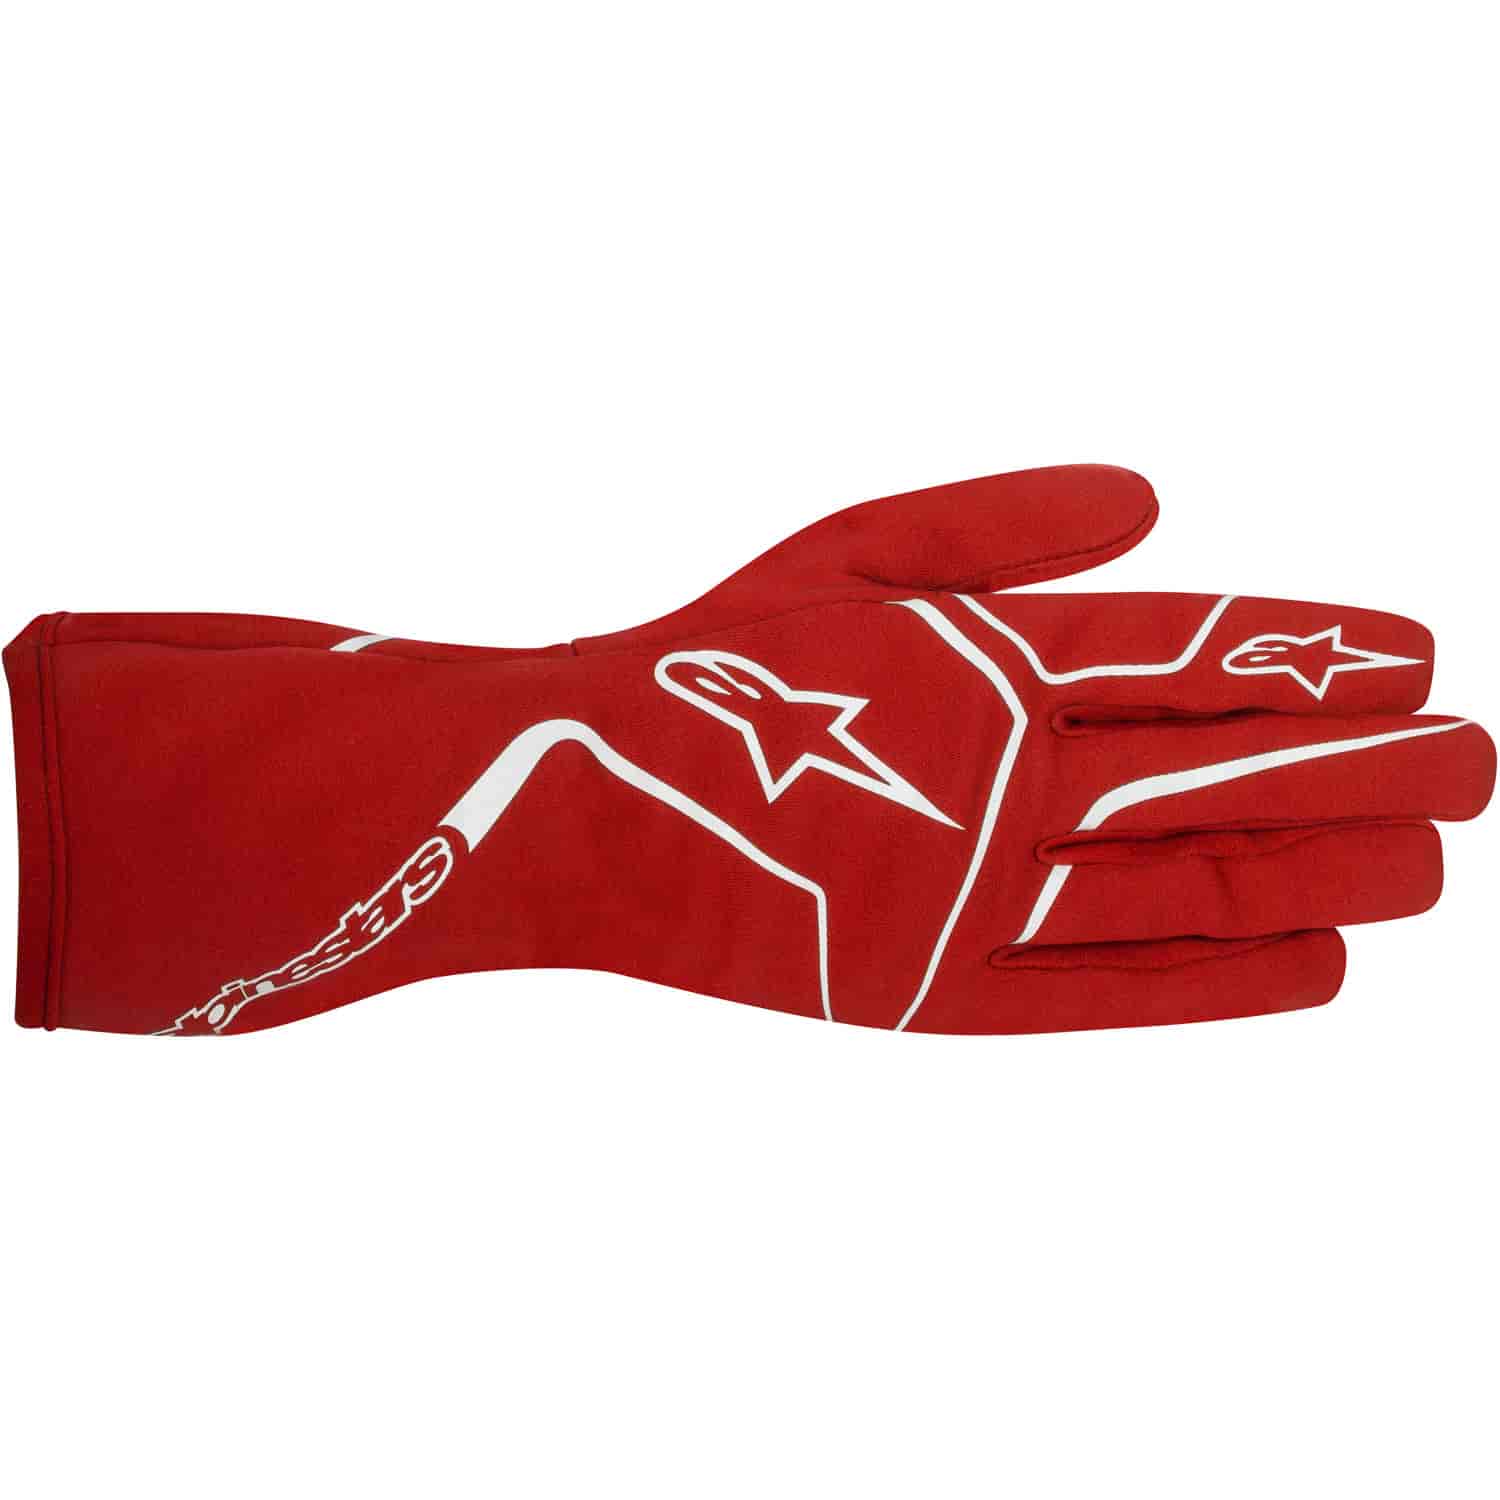 Tech 1-K Race S Youth Gloves Red